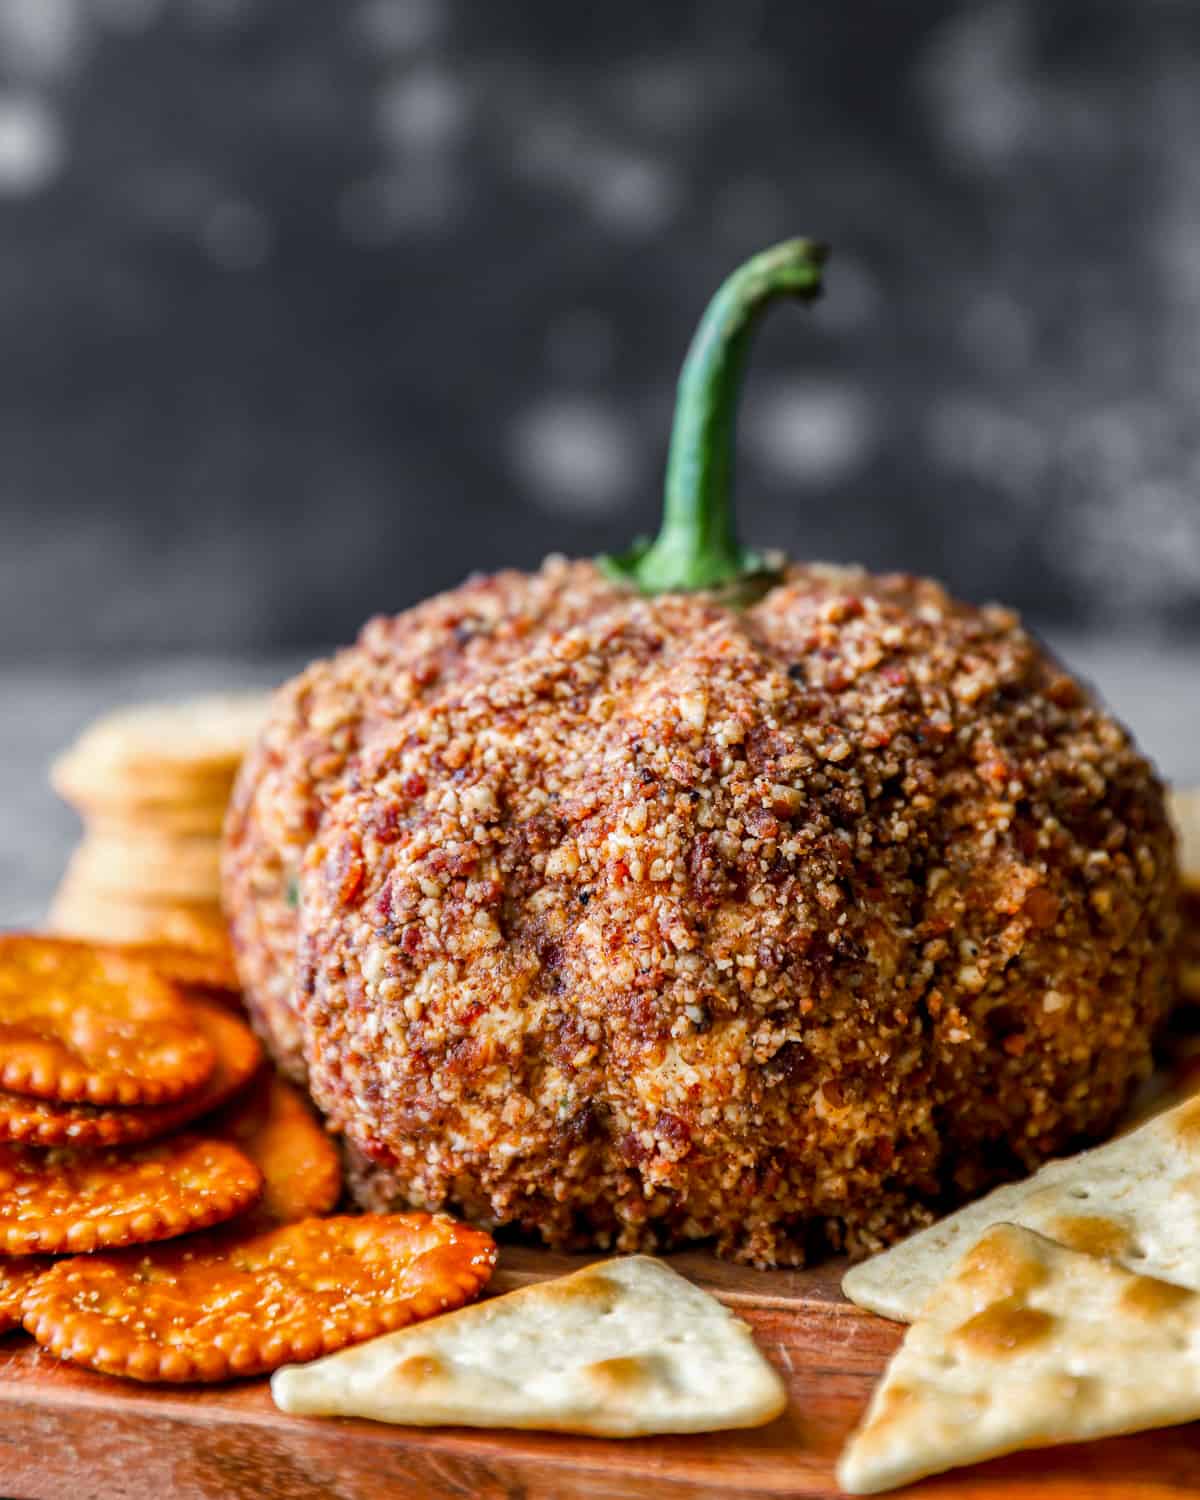 Pumpkin cheese ball on a wooden board with crackers.